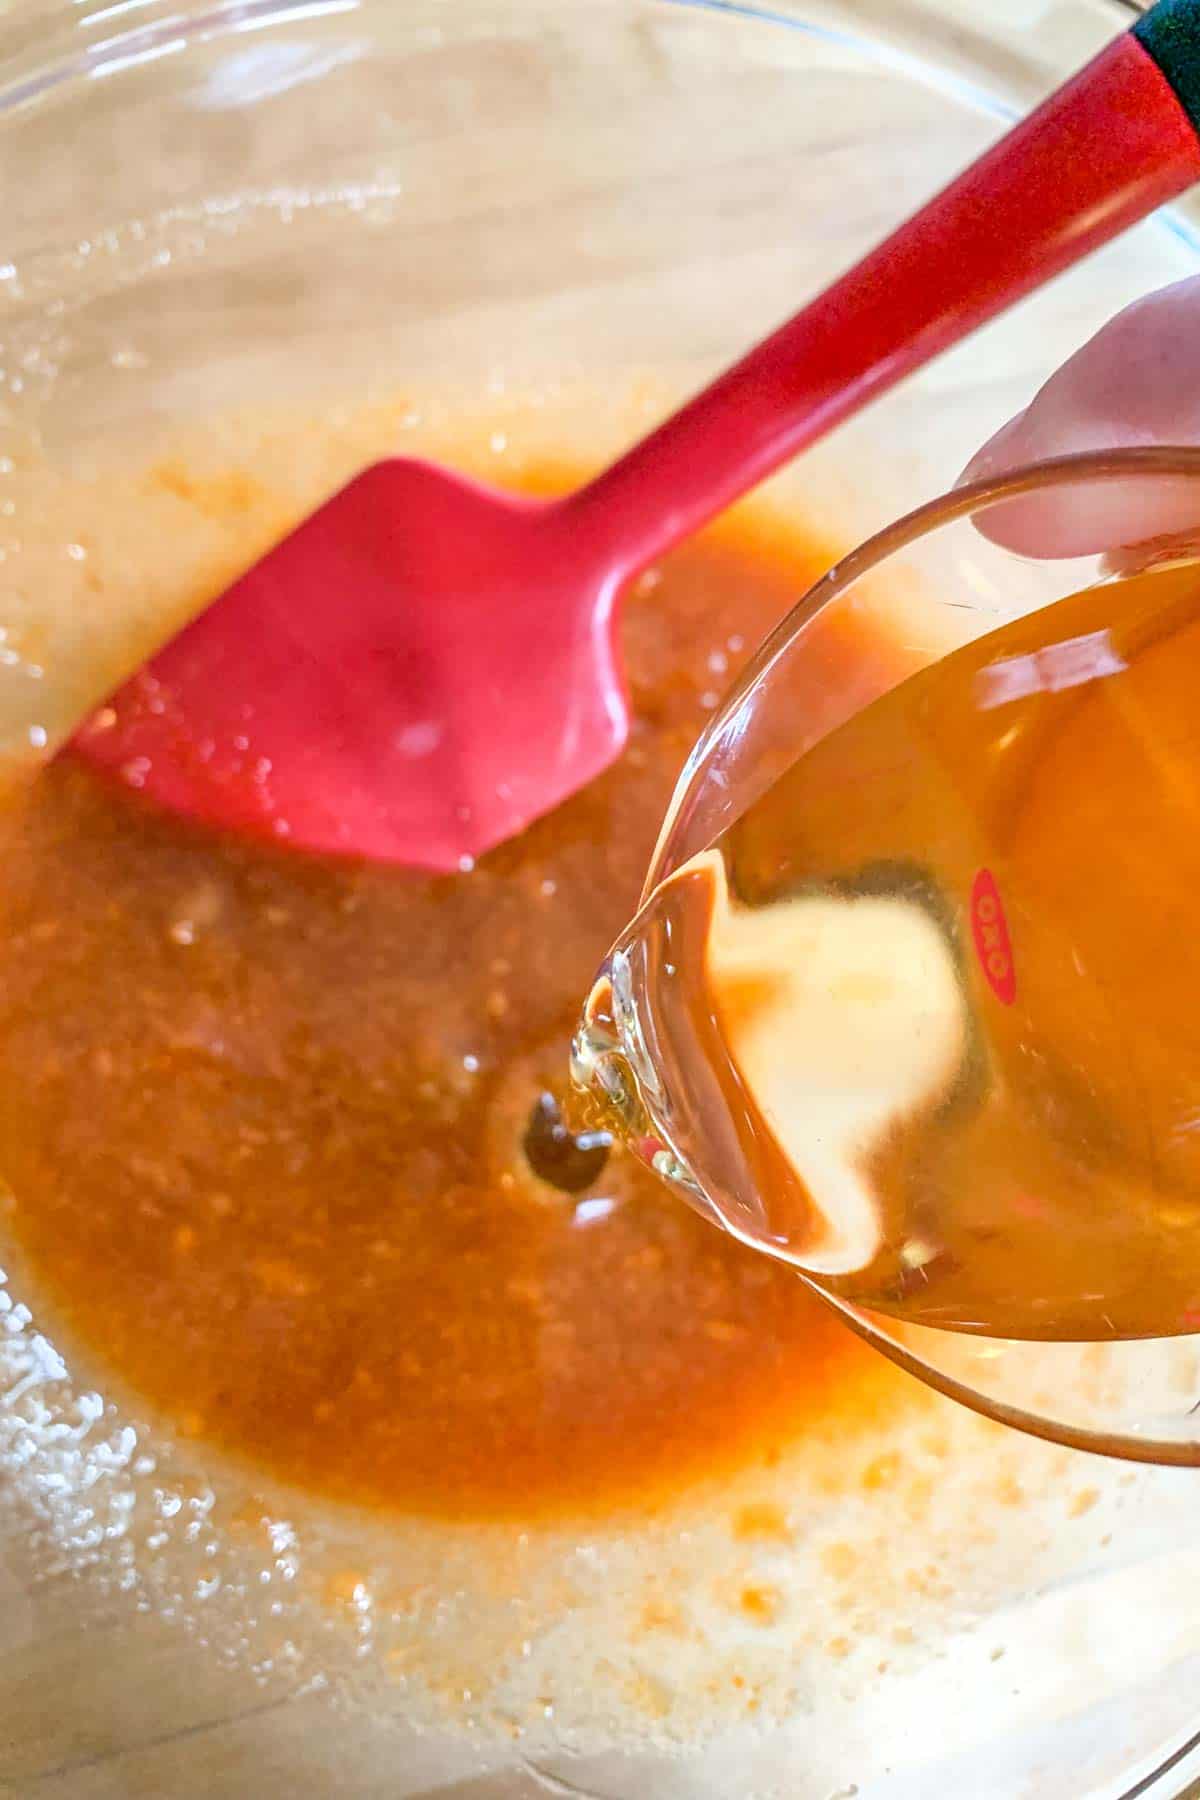 Vegetable oil being poured into a glass mixing bowl.